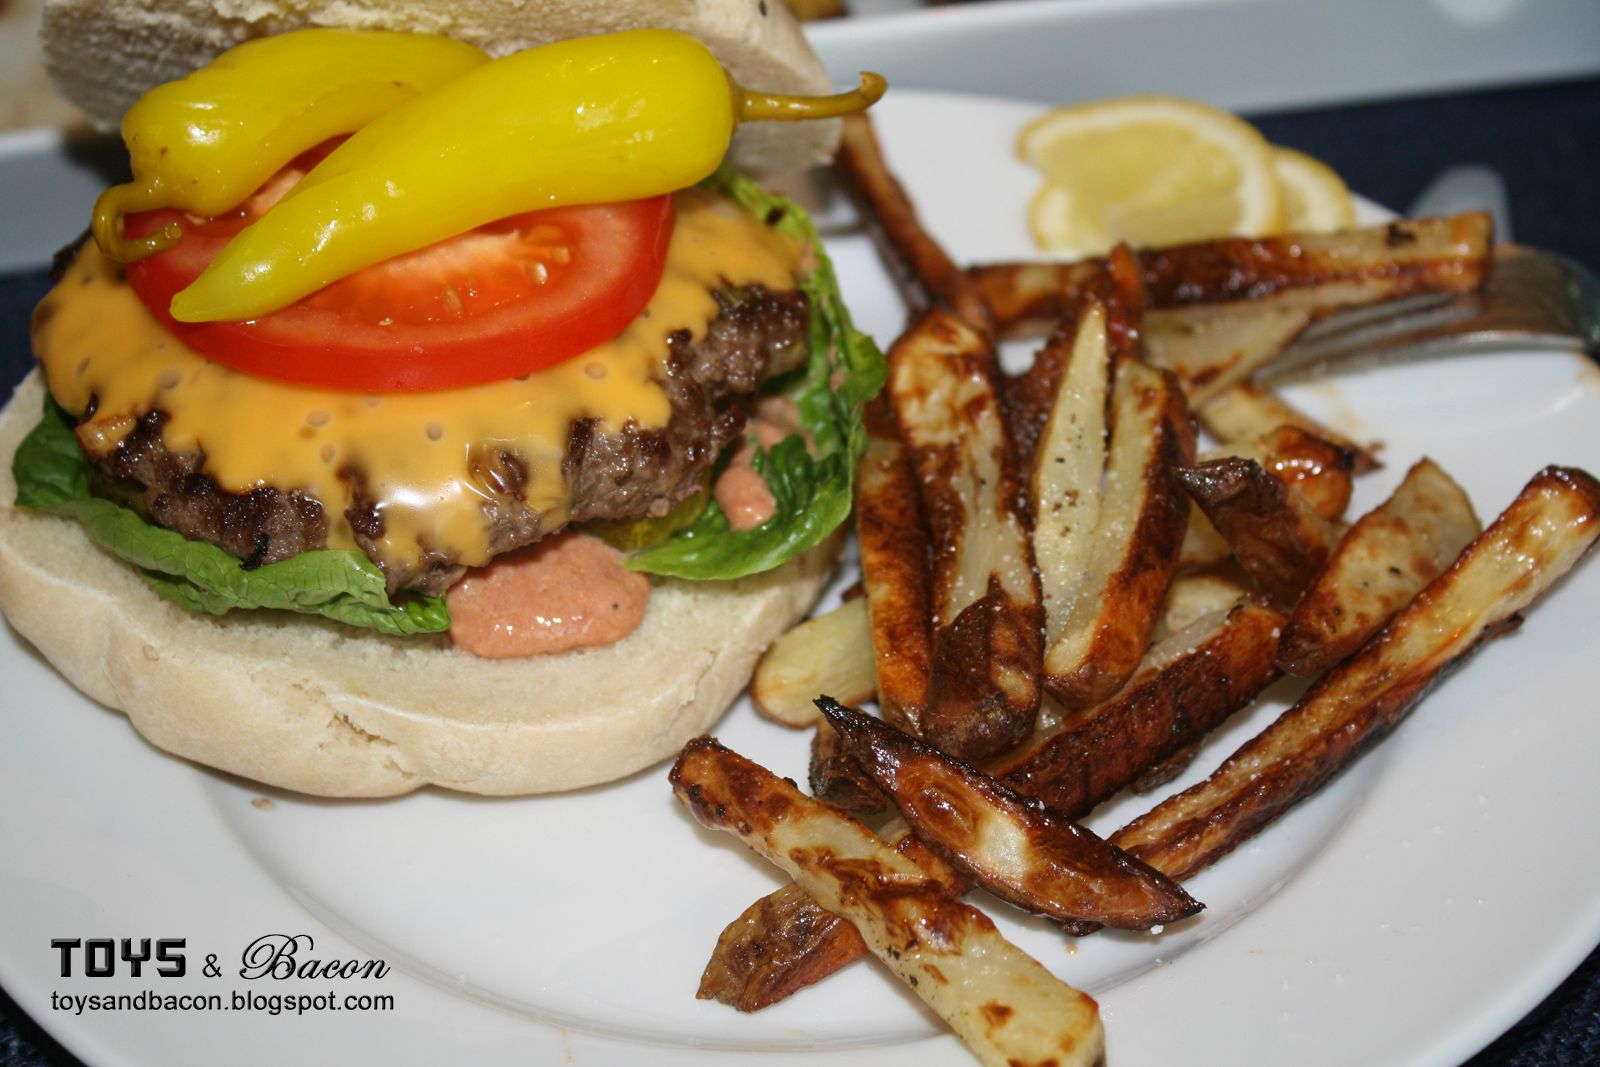 Cheeseburger with Banana Peppers and special sauce, with salt and peppered  fries.